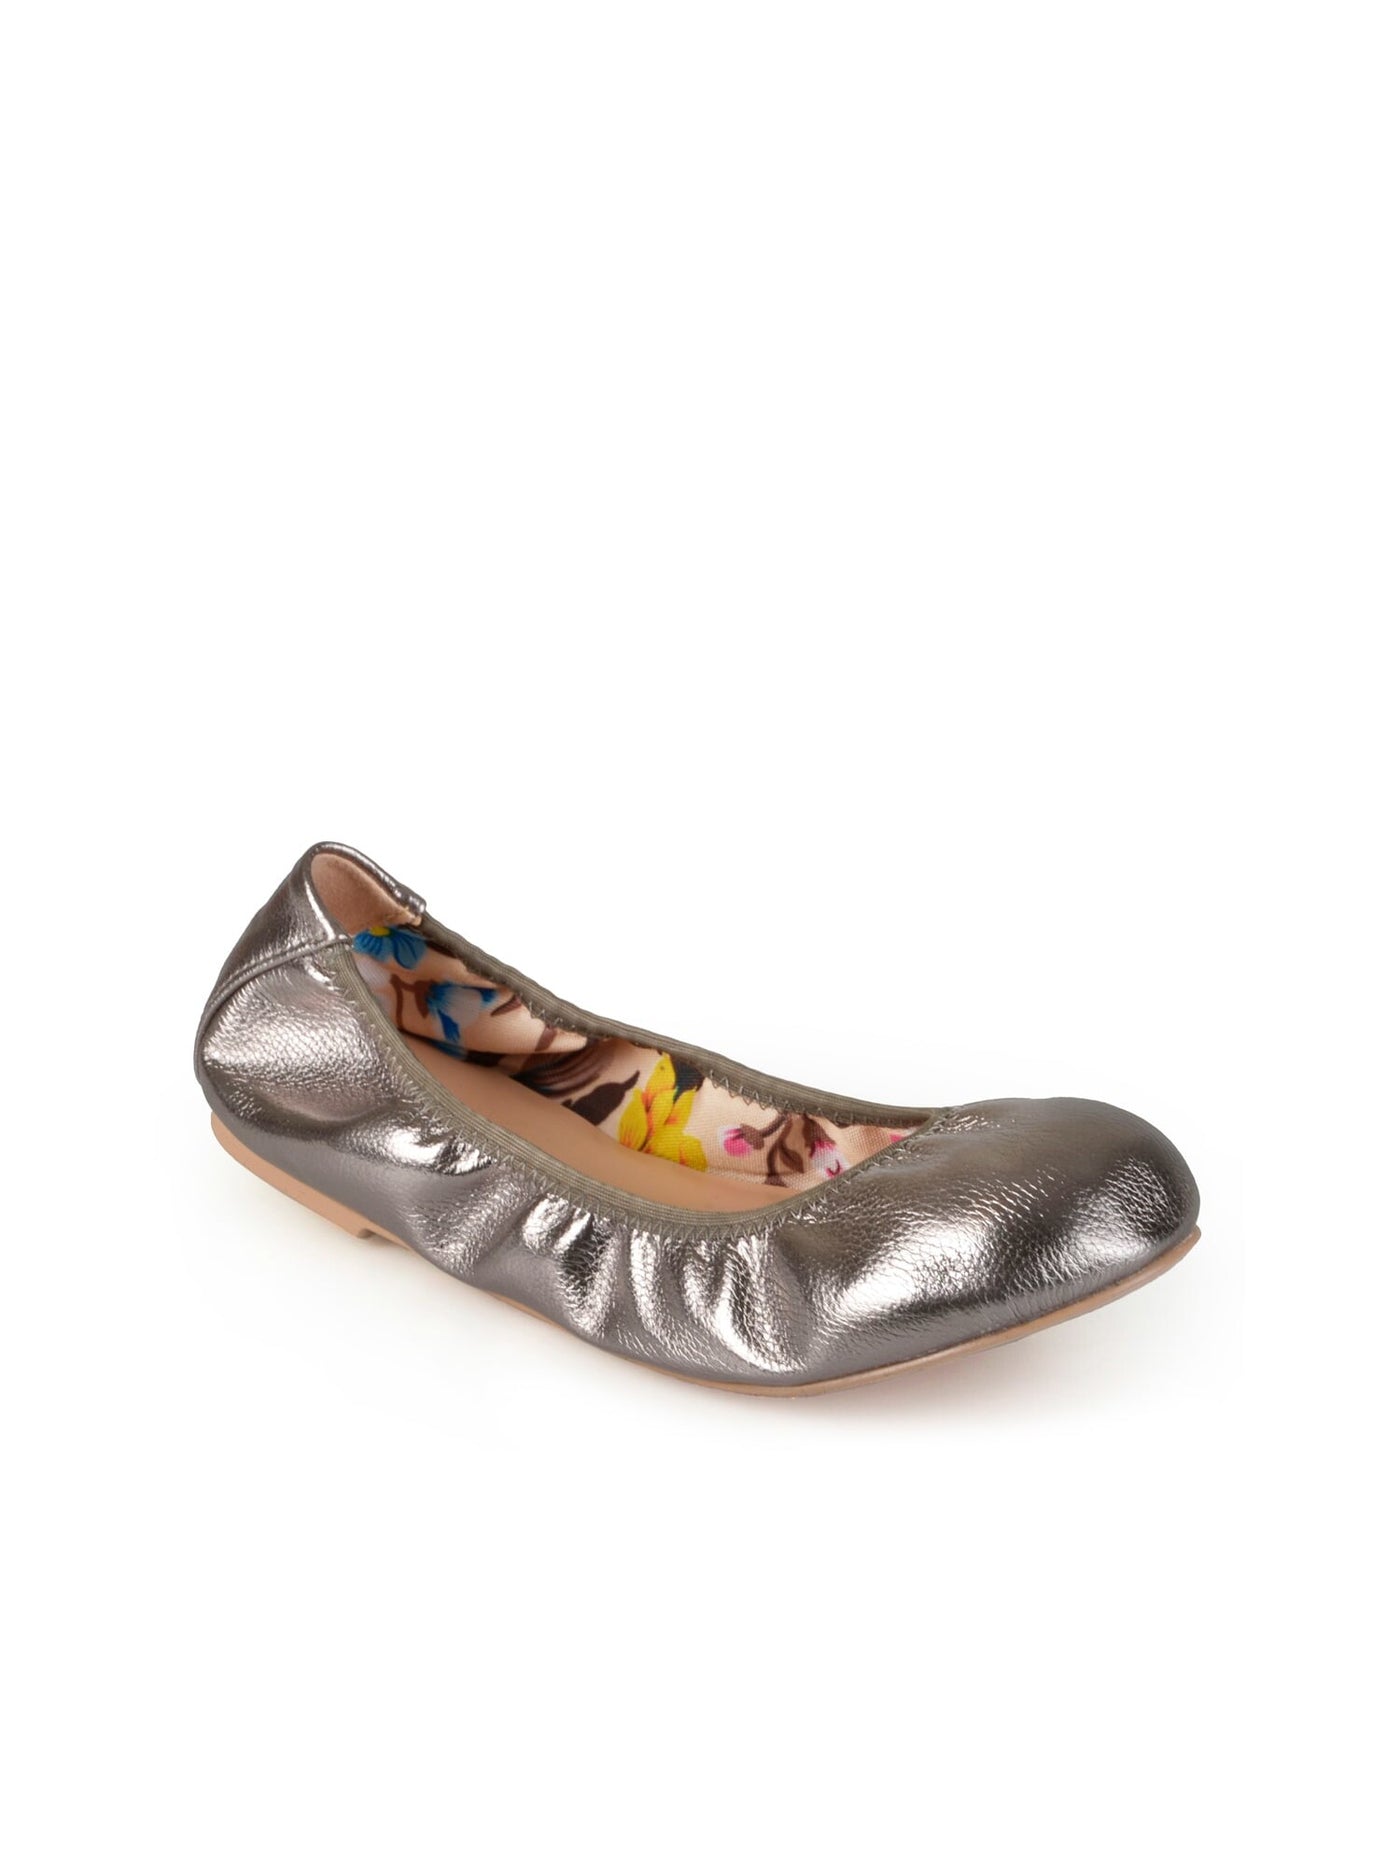 JOURNEE COLLECTION Womens Silver Metallic Stretch Lindy Round Toe Slip On Ballet Flats 6